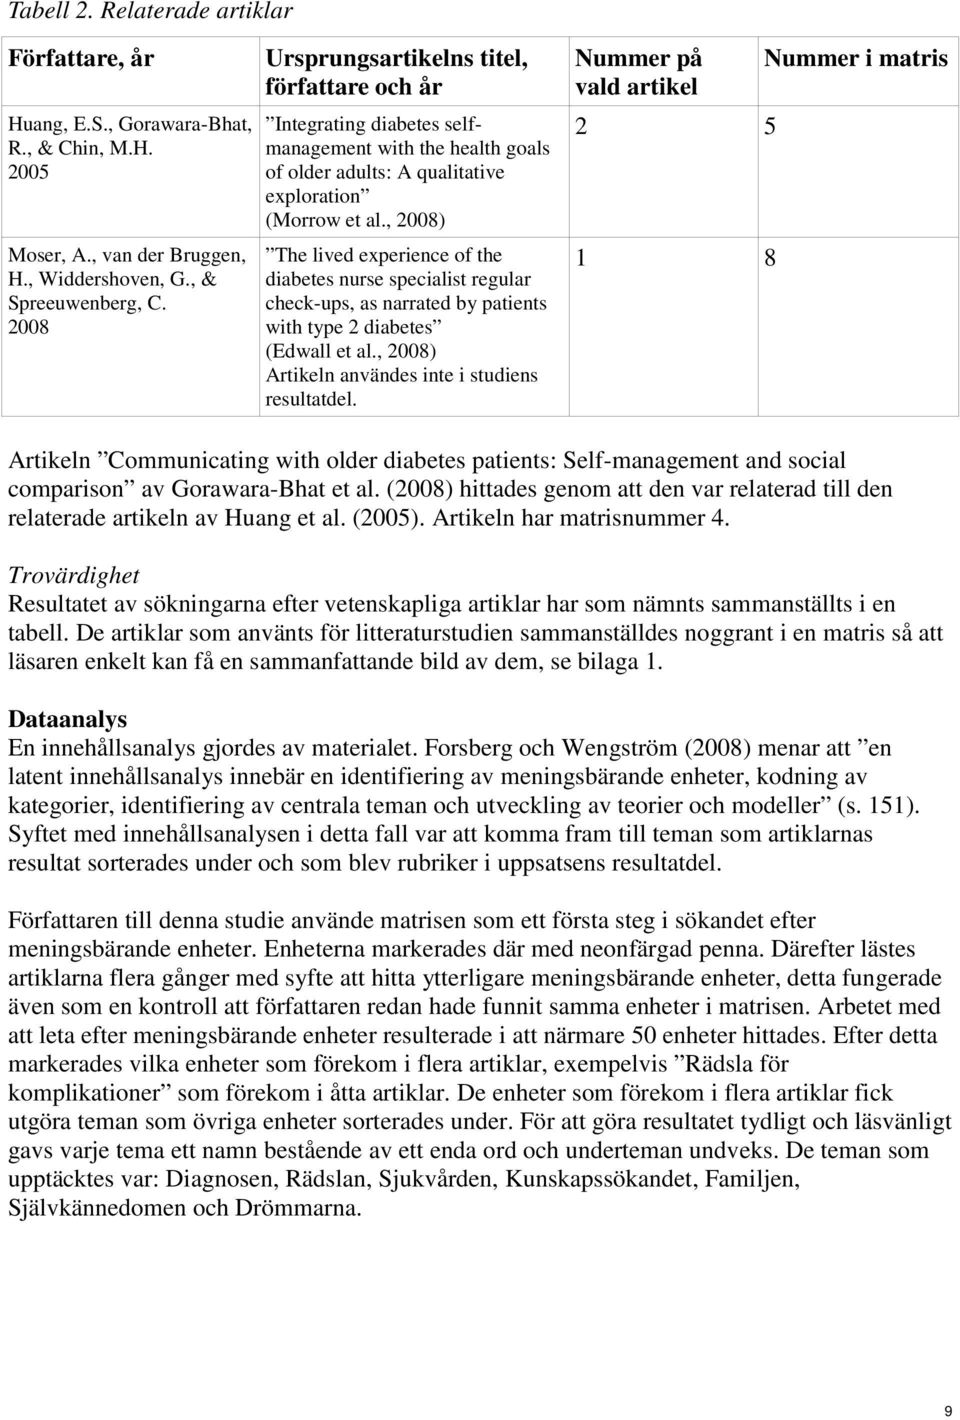 , 2008) The lived experience of the diabetes nurse specialist regular check-ups, as narrated by patients with type 2 diabetes (Edwall et al., 2008) Artikeln användes inte i studiens resultatdel.